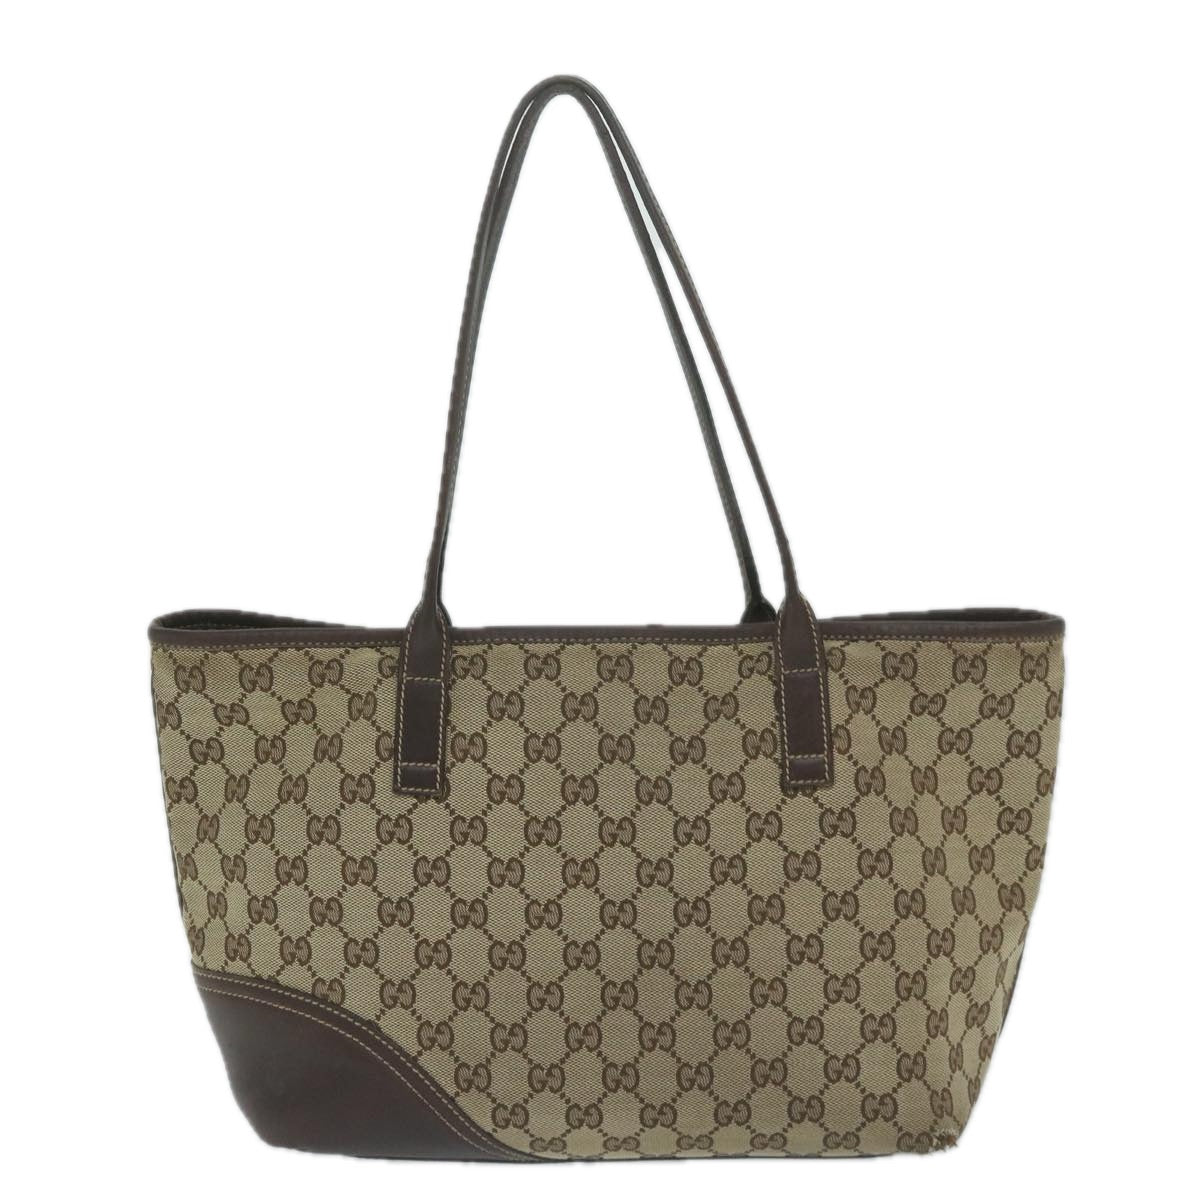 GUCCI GG Canvas Tote Bag Beige 169946 Auth bs11421